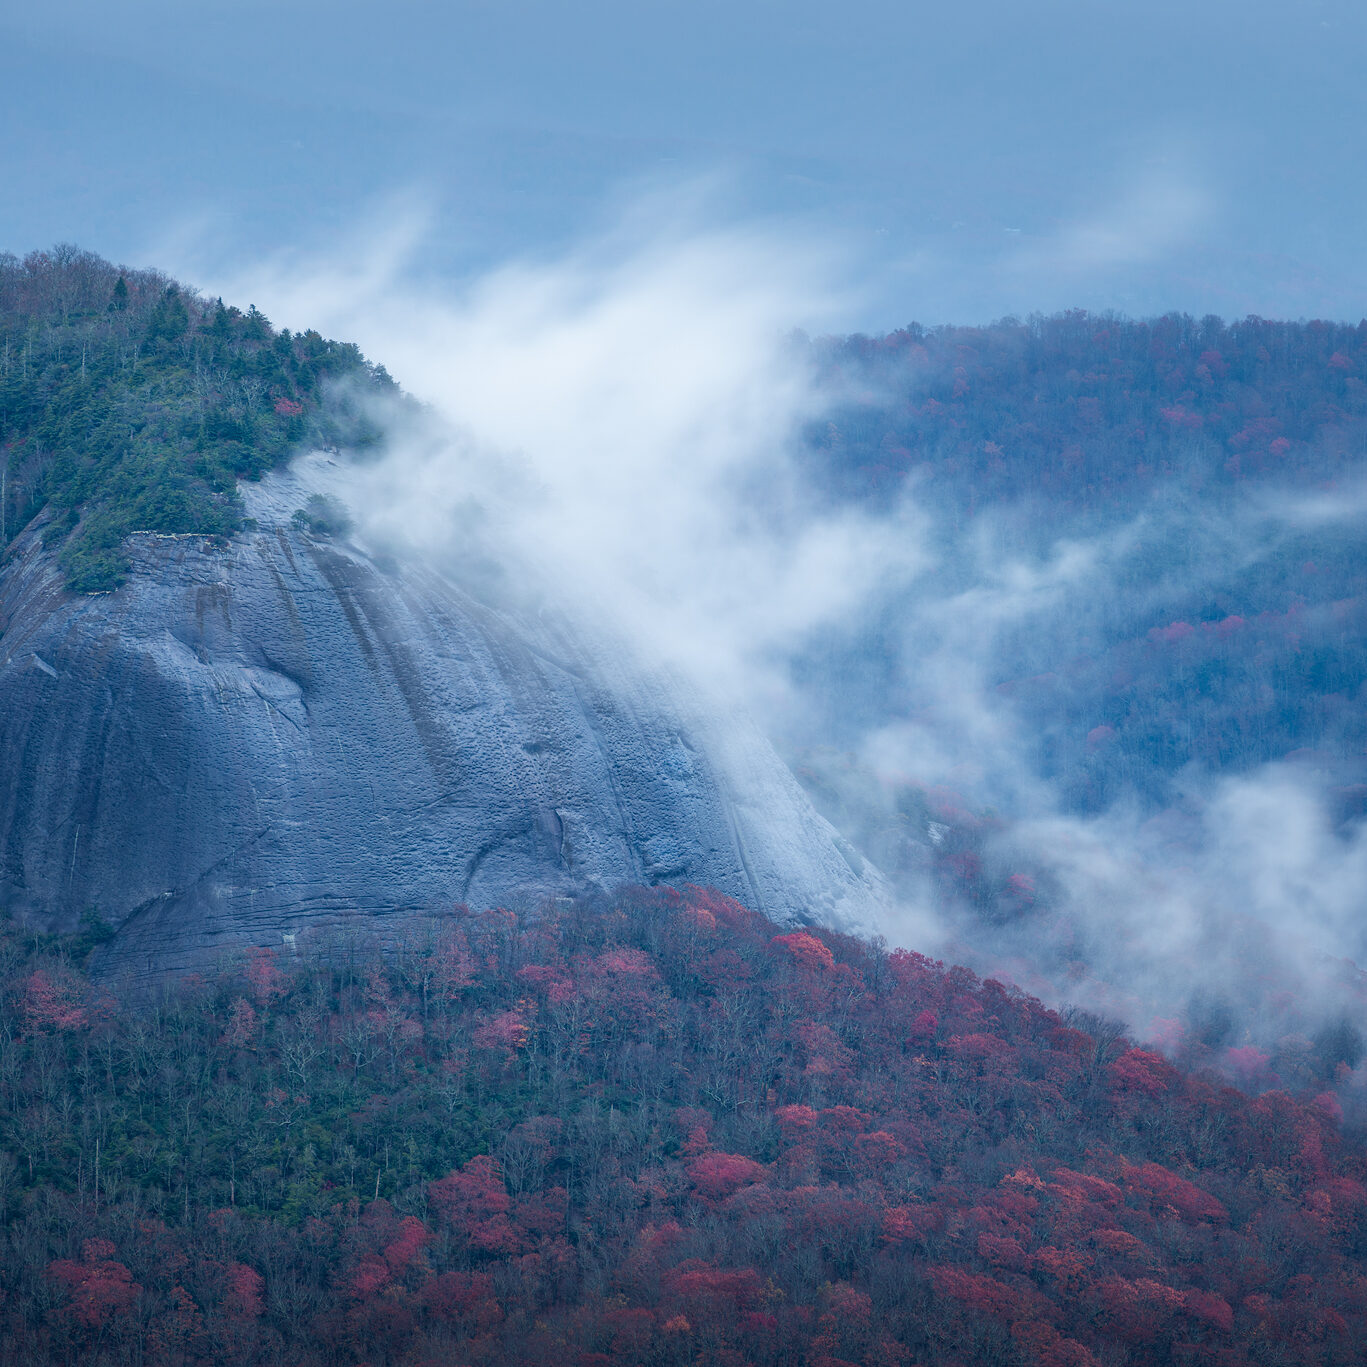 Clearing fog from overnight rains drifts off the great face of Looking Glass Rock in Pisgah National Forest.